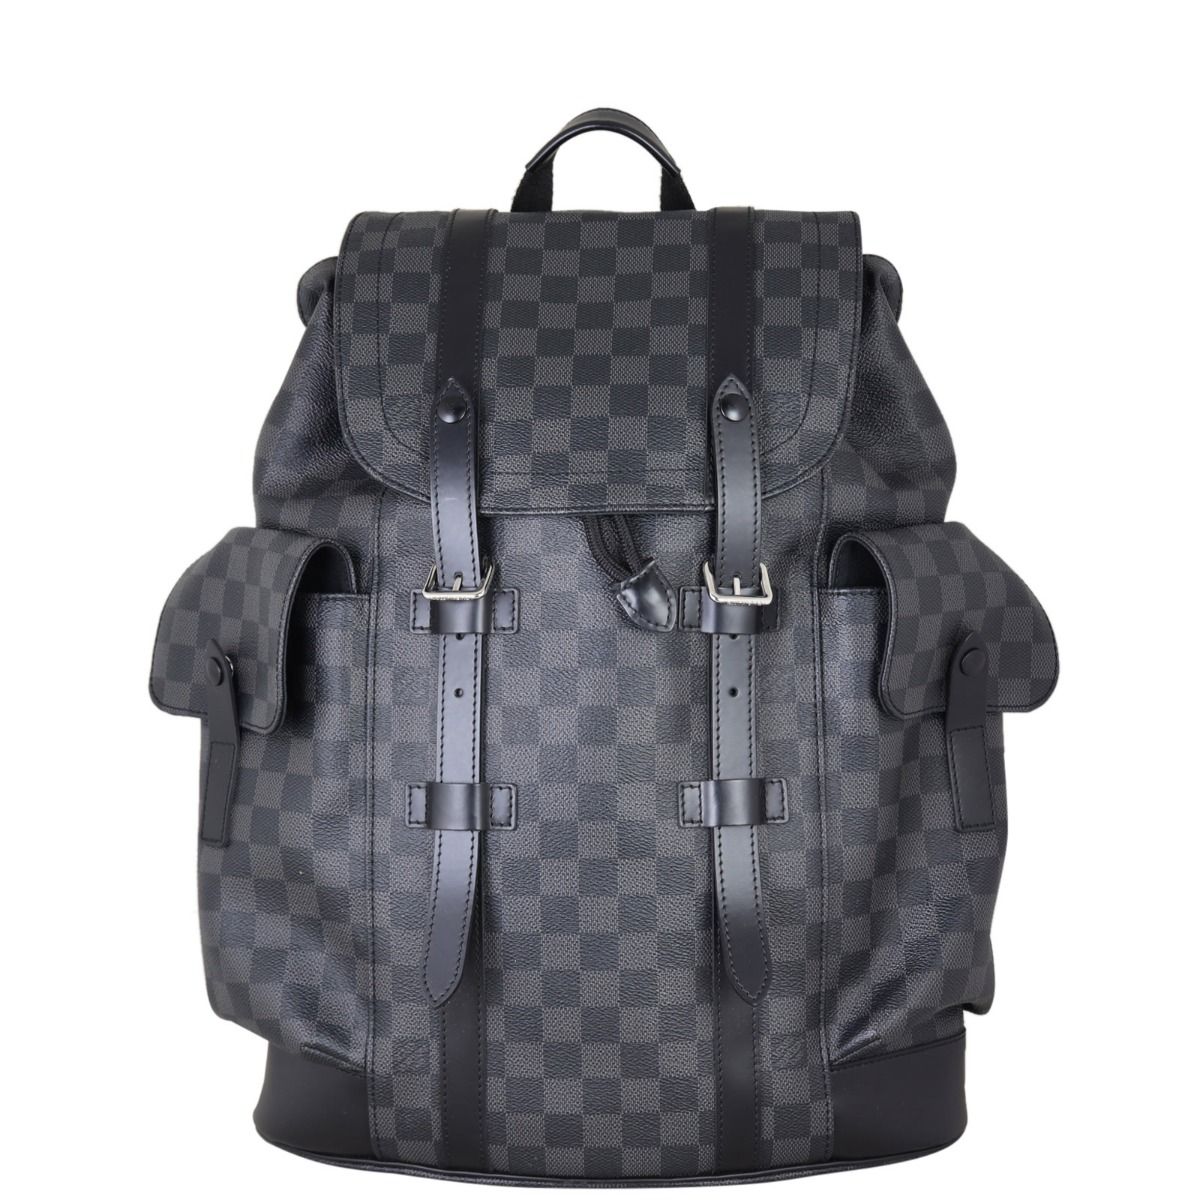 LOUIS VUITTON CHRISTOPHER BACKPACK IN BLACK AND WHITE DAMIER